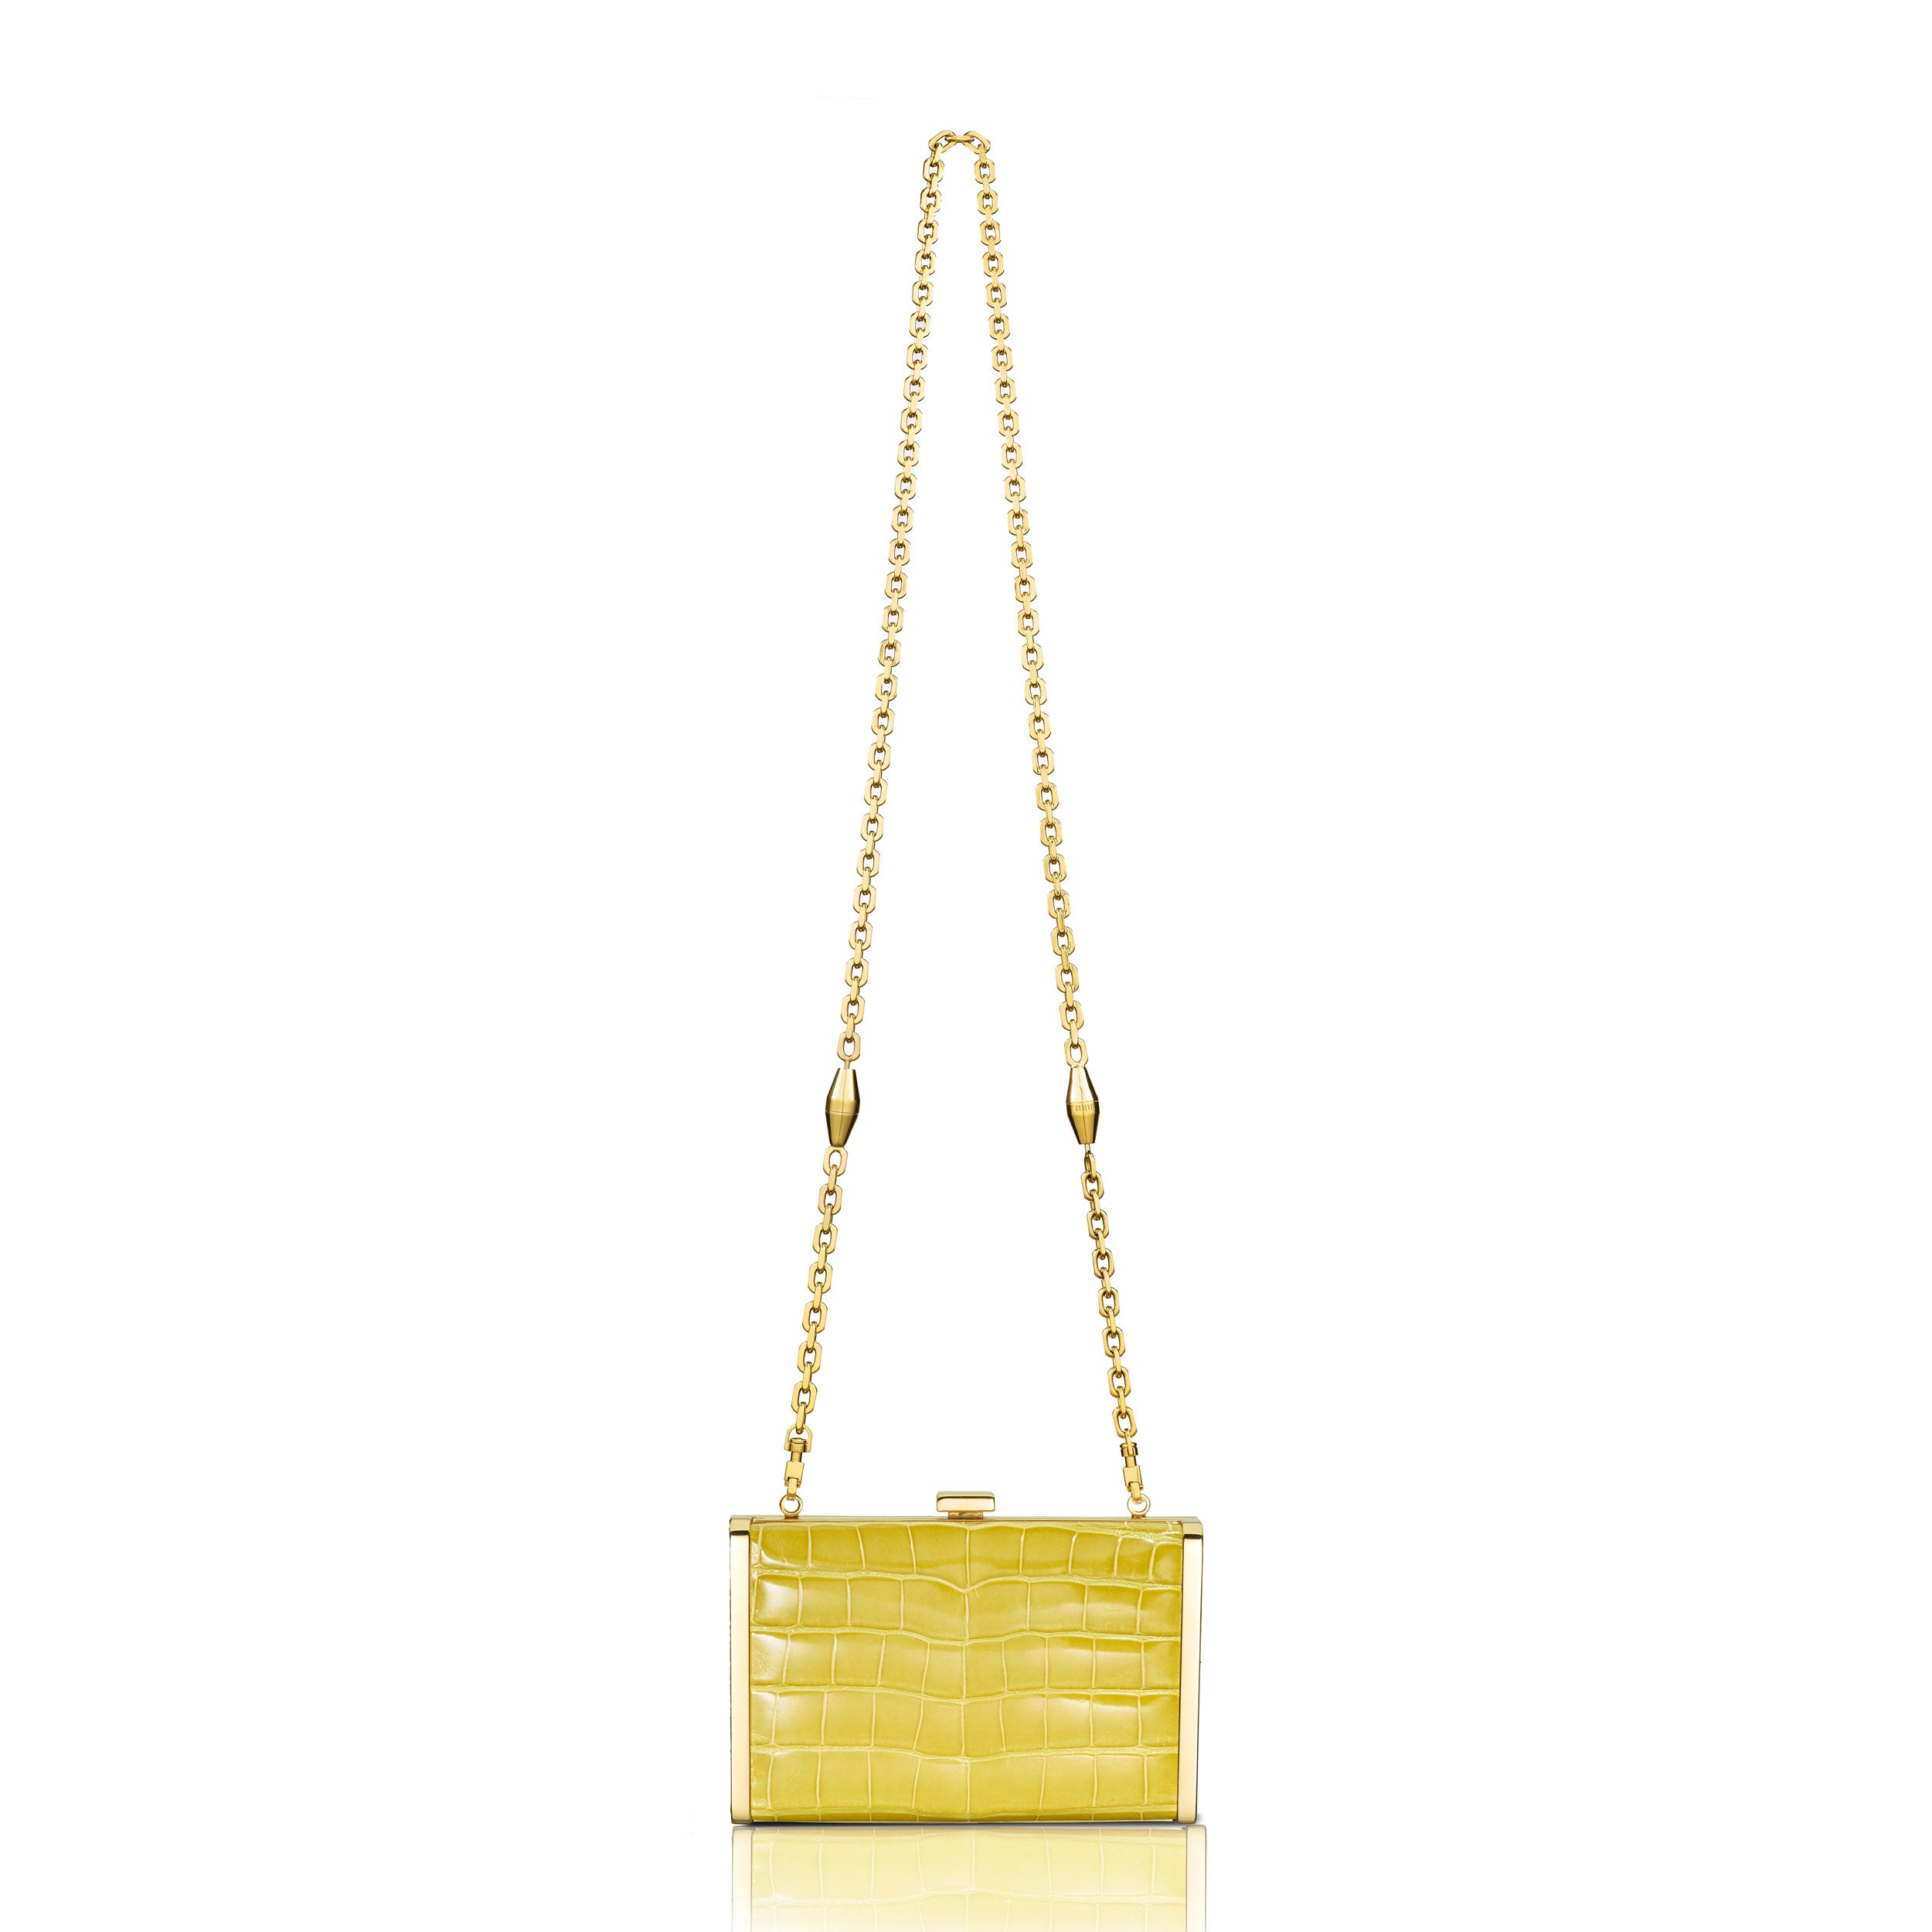 STALVEY Rounded Clutch in Yellow Alligator with 24kt Gold Hardware Back View with Chain